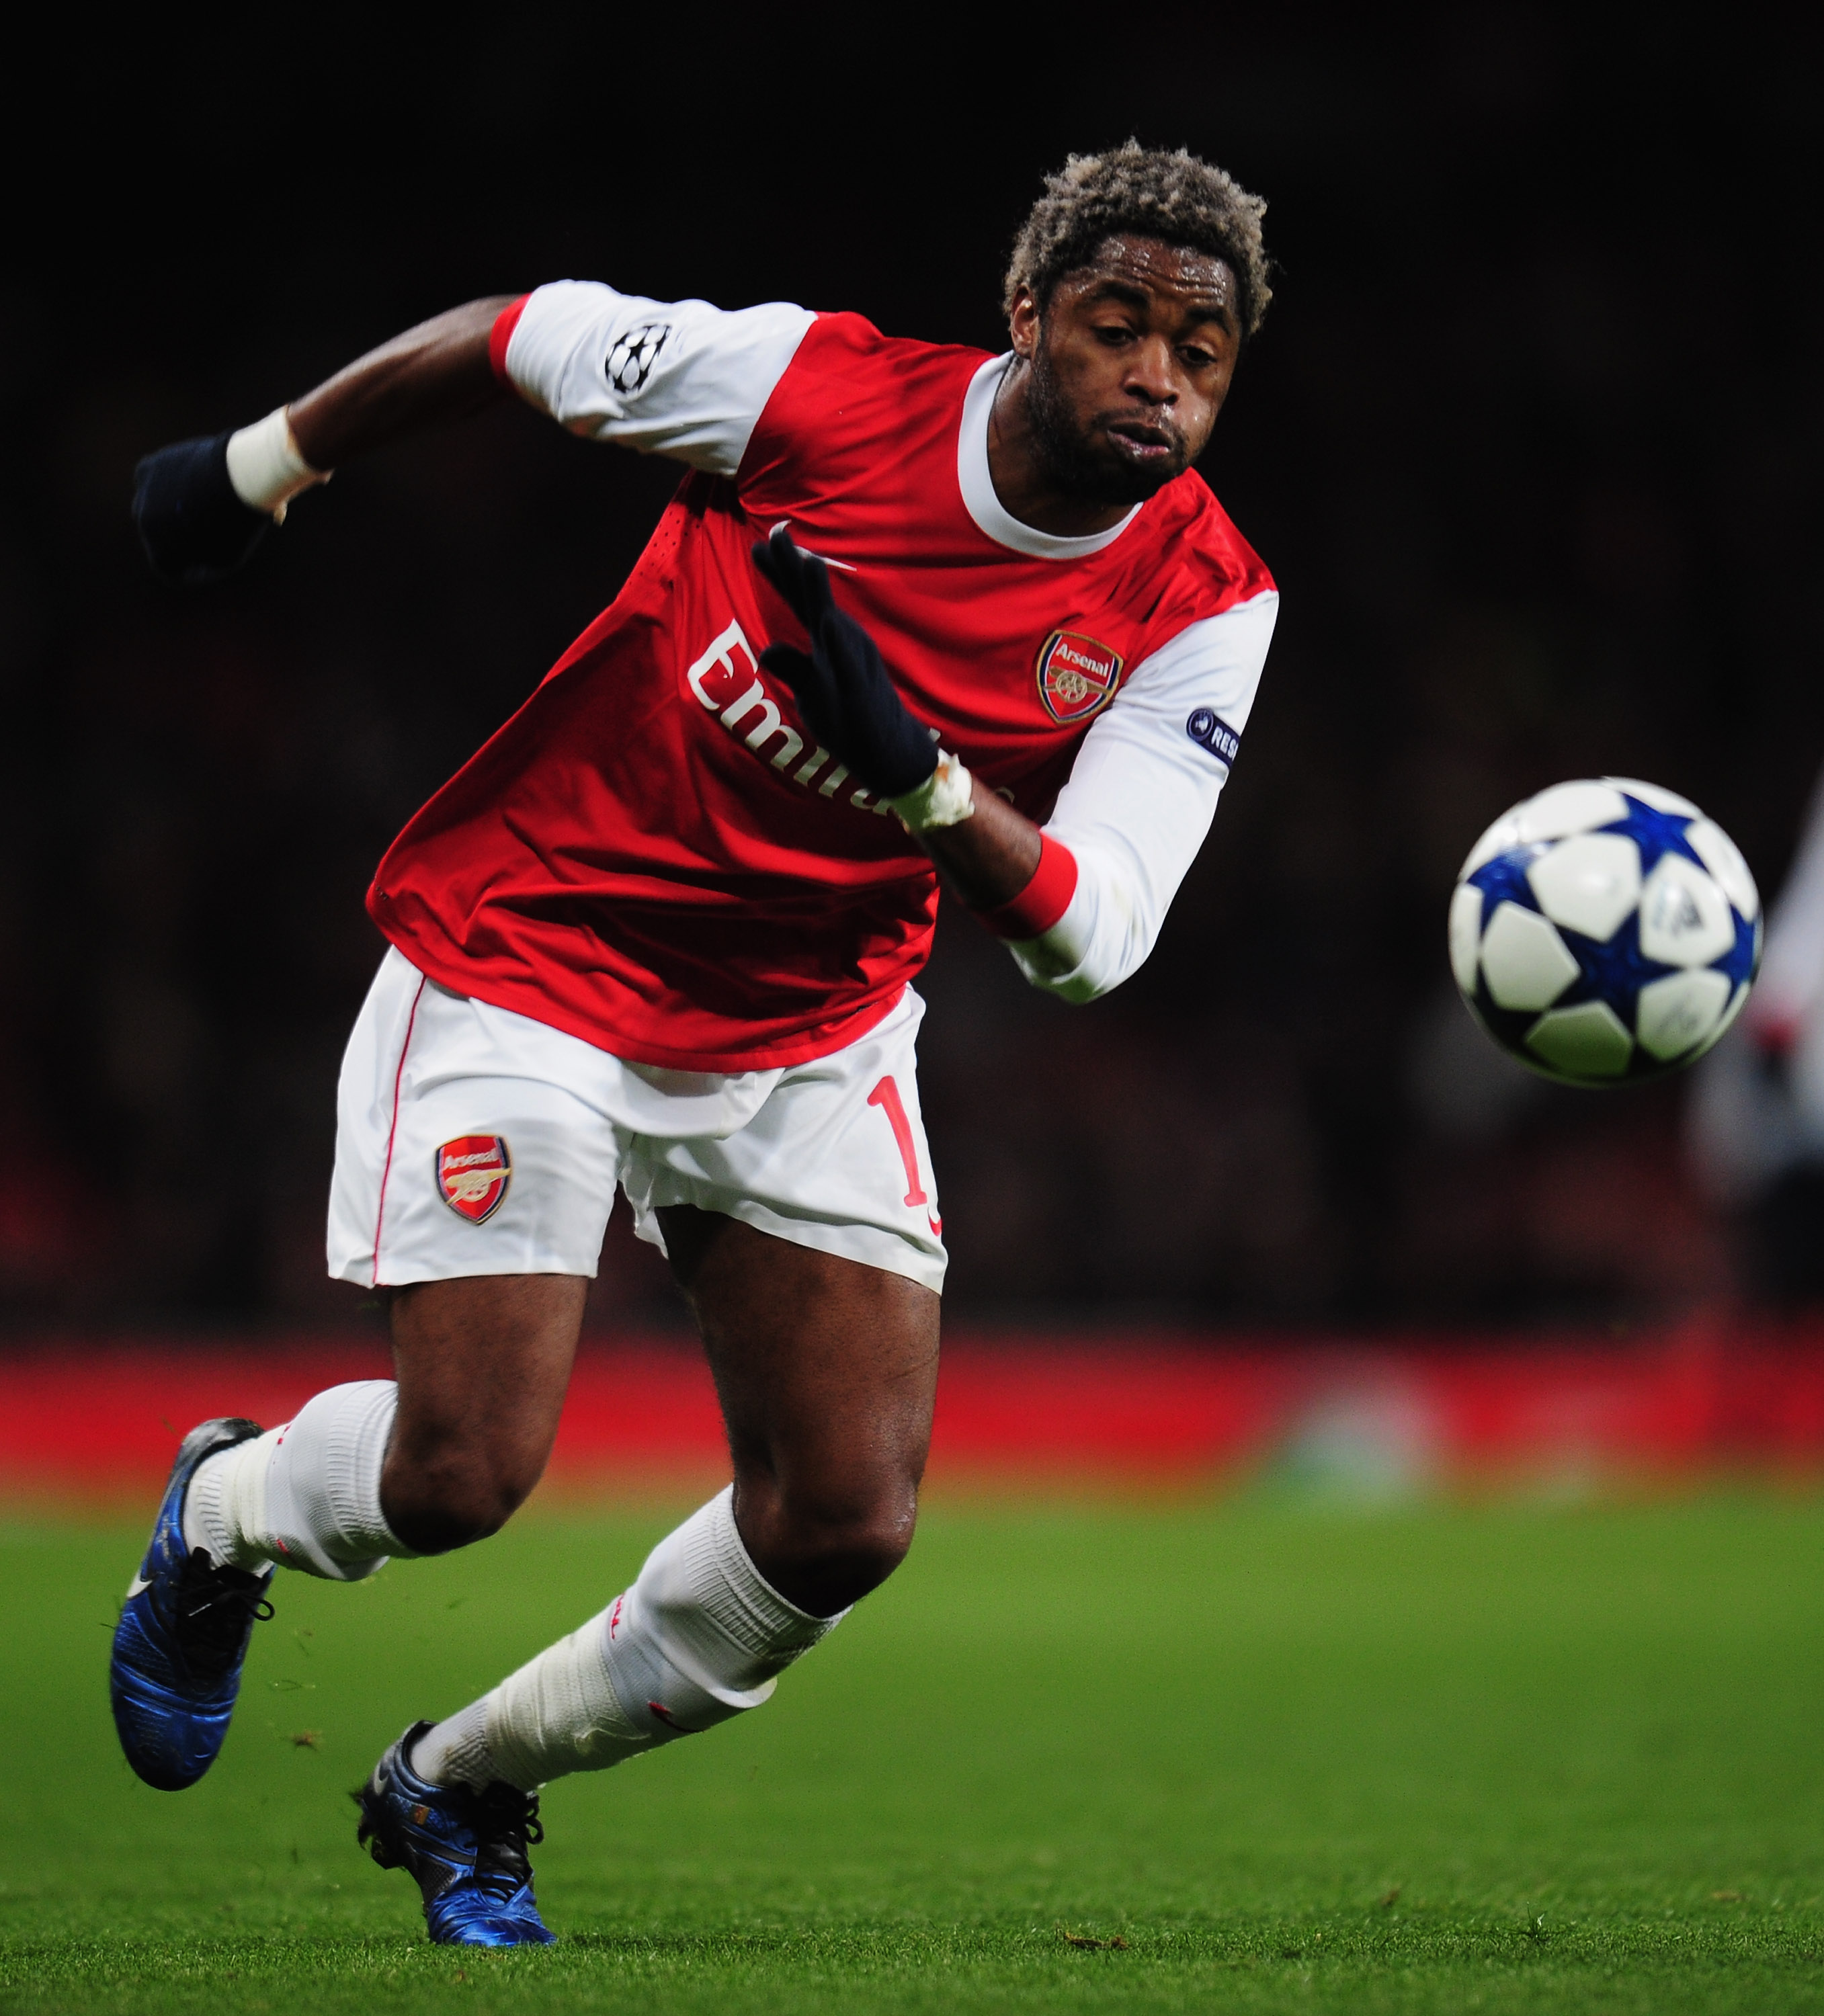 LONDON, ENGLAND - DECEMBER 08:  Alex Song of Arsenal in action during the UEFA Champions League Group H match between Arsenal and FK Partizan Belgrade at the Emirates Stadium on December 8, 2010 in London, England.  (Photo by Shaun Botterill/Getty Images)